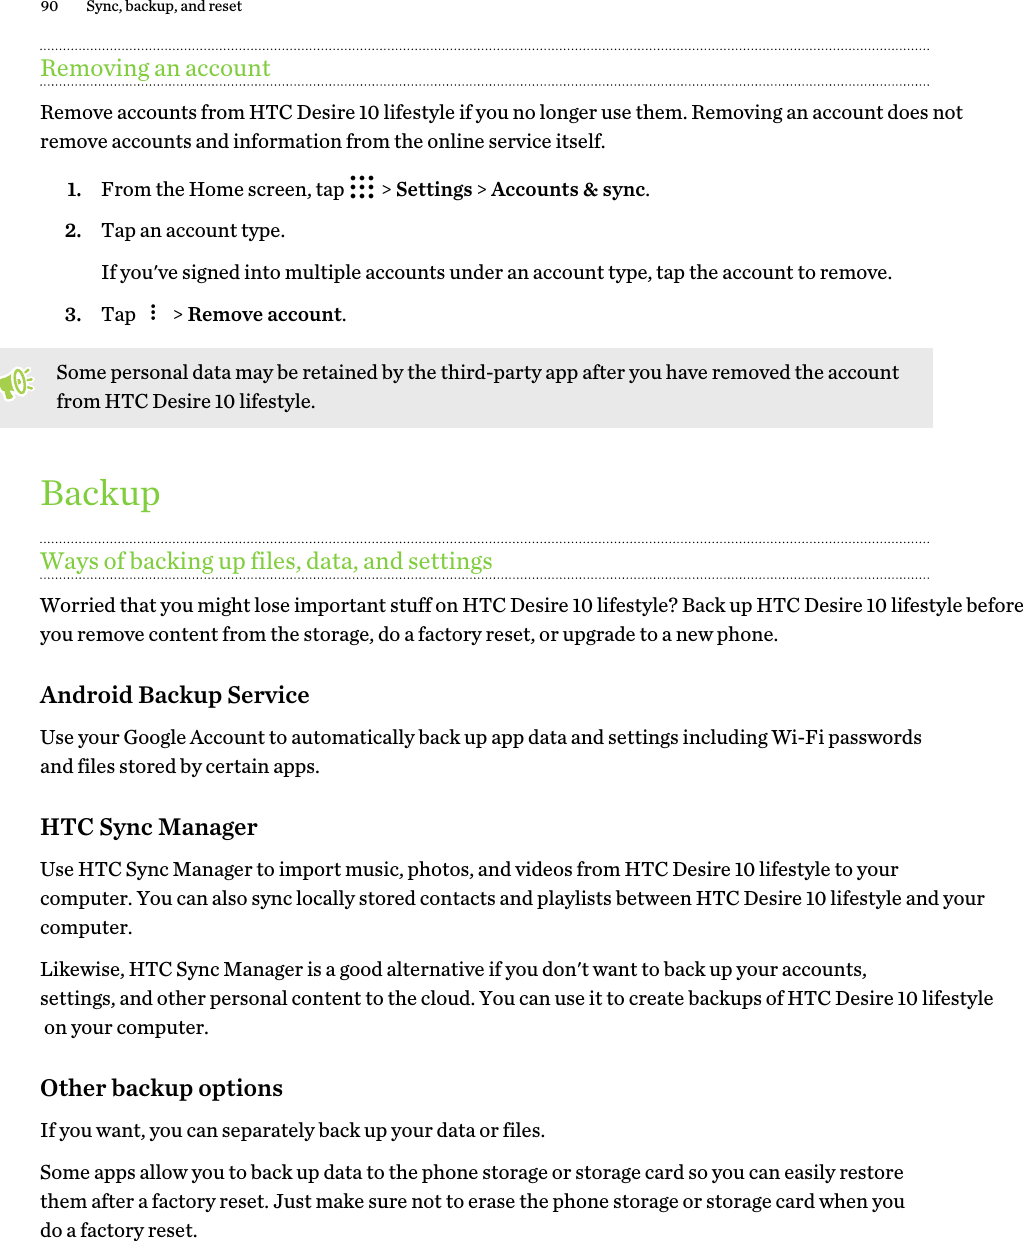 Removing an accountRemove accounts from HTC Desire 10 lifestyle if you no longer use them. Removing an account does not remove accounts and information from the online service itself.1. From the Home screen, tap   &gt; Settings &gt; Accounts &amp; sync.2. Tap an account type. If you&apos;ve signed into multiple accounts under an account type, tap the account to remove.3. Tap   &gt; Remove account.Some personal data may be retained by the third-party app after you have removed the account from HTC Desire 10 lifestyle.BackupWays of backing up files, data, and settingsWorried that you might lose important stuff on HTC Desire 10 lifestyle? Back up HTC Desire 10 lifestyle before you remove content from the storage, do a factory reset, or upgrade to a new phone. Android Backup ServiceUse your Google Account to automatically back up app data and settings including Wi-Fi passwords and files stored by certain apps.HTC Sync ManagerUse HTC Sync Manager to import music, photos, and videos from HTC Desire 10 lifestyle to your computer. You can also sync locally stored contacts and playlists between HTC Desire 10 lifestyle and your computer.Likewise, HTC Sync Manager is a good alternative if you don&apos;t want to back up your accounts, settings, and other personal content to the cloud. You can use it to create backups of HTC Desire 10 lifestyle on your computer.Other backup optionsIf you want, you can separately back up your data or files.Some apps allow you to back up data to the phone storage or storage card so you can easily restore them after a factory reset. Just make sure not to erase the phone storage or storage card when you do a factory reset.90 Sync, backup, and reset